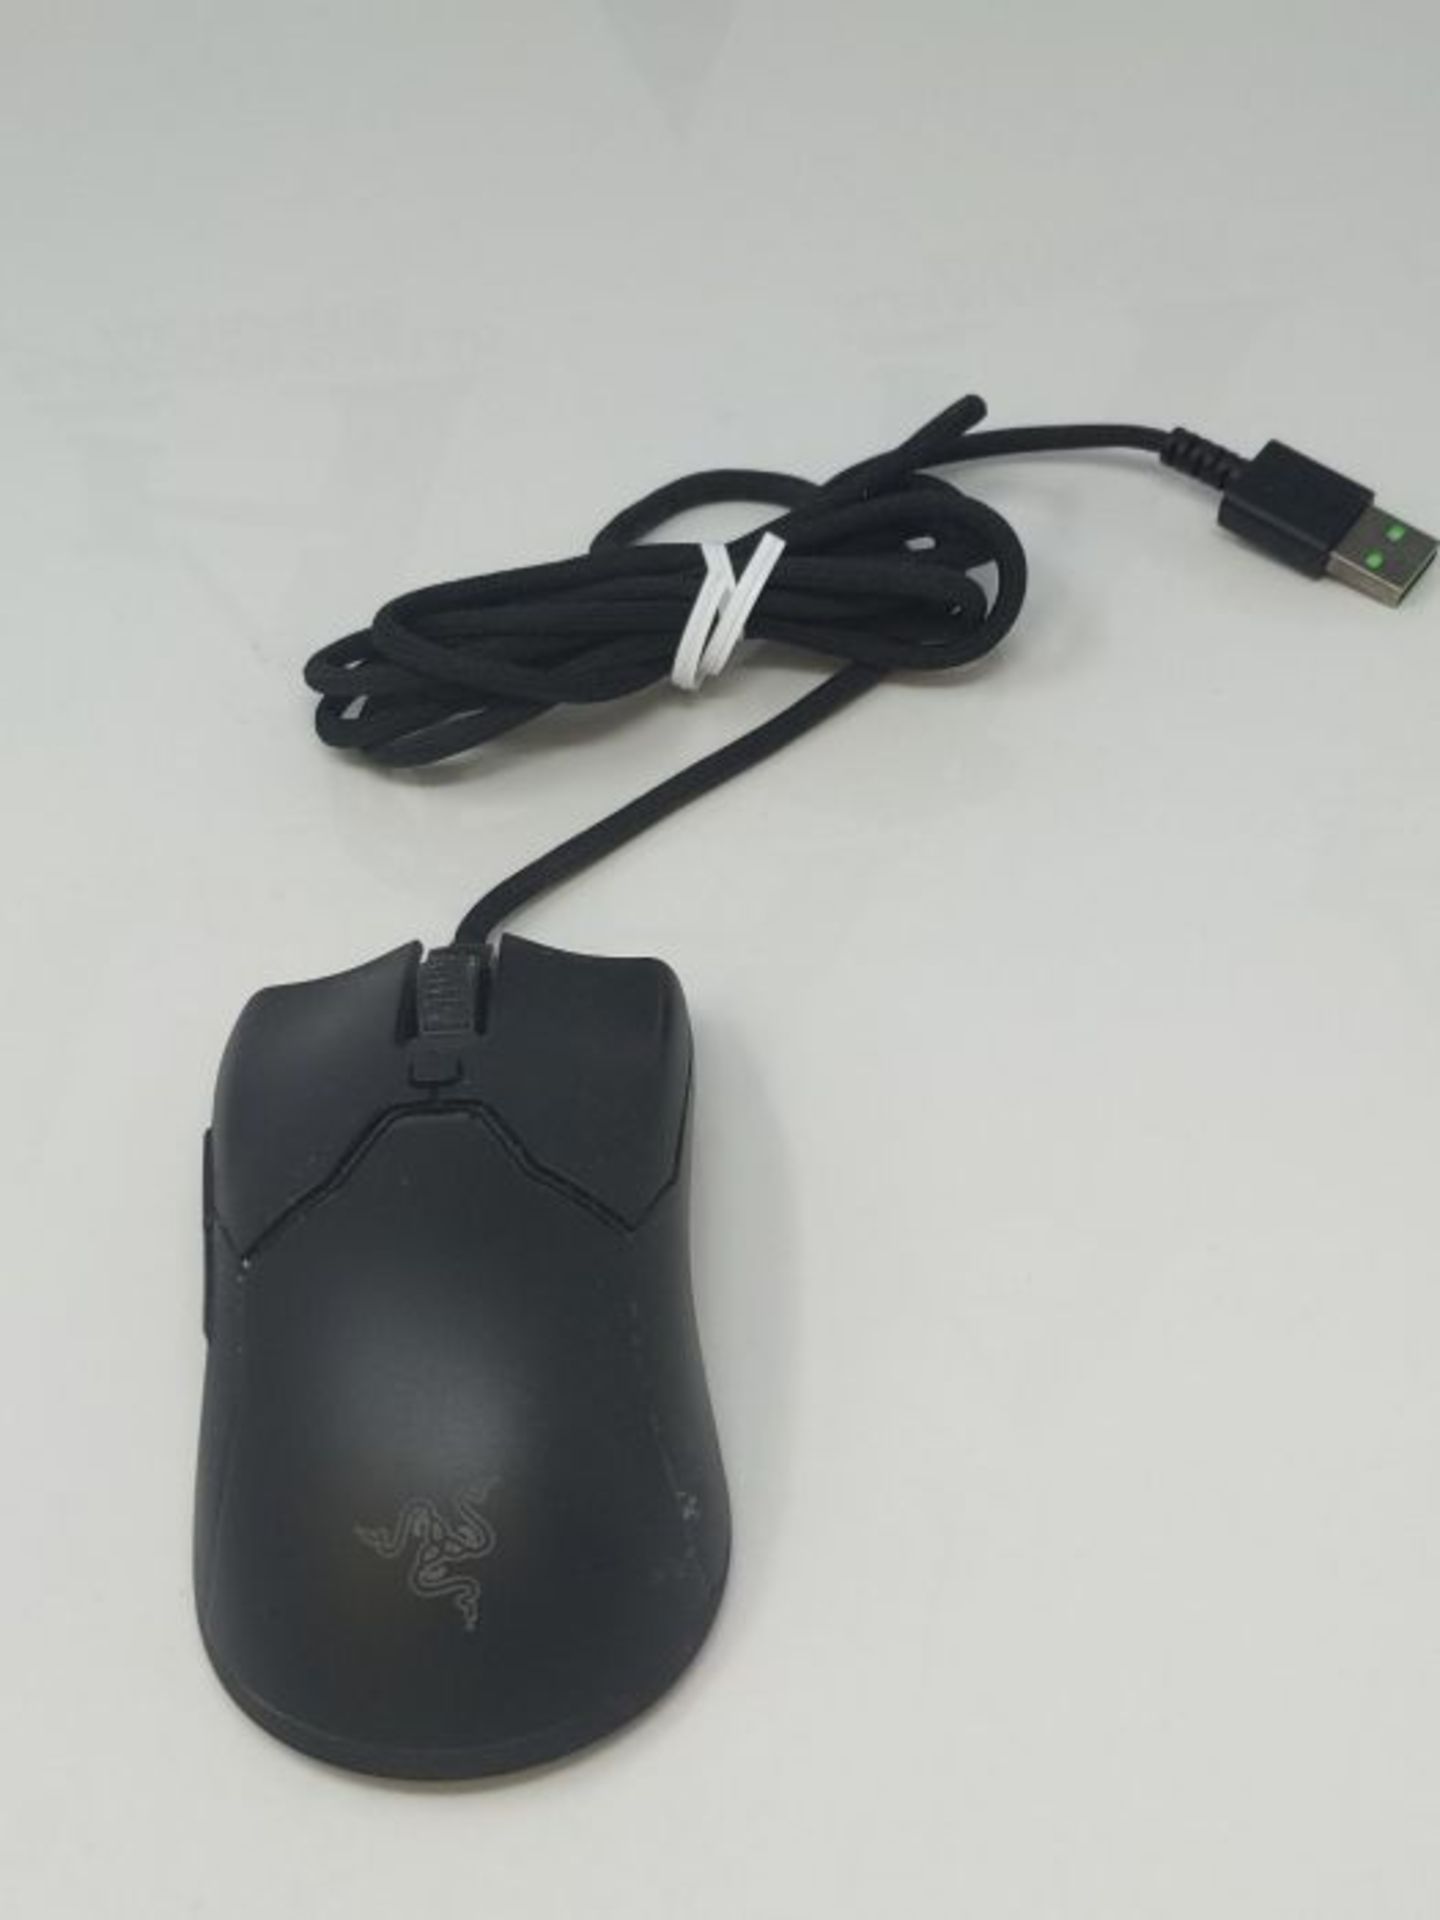 Razer Viper Mini - Wired Gaming Mouse for PC/Mac (Ultralight 61g, Ambidextrous, Speedf - Image 2 of 2